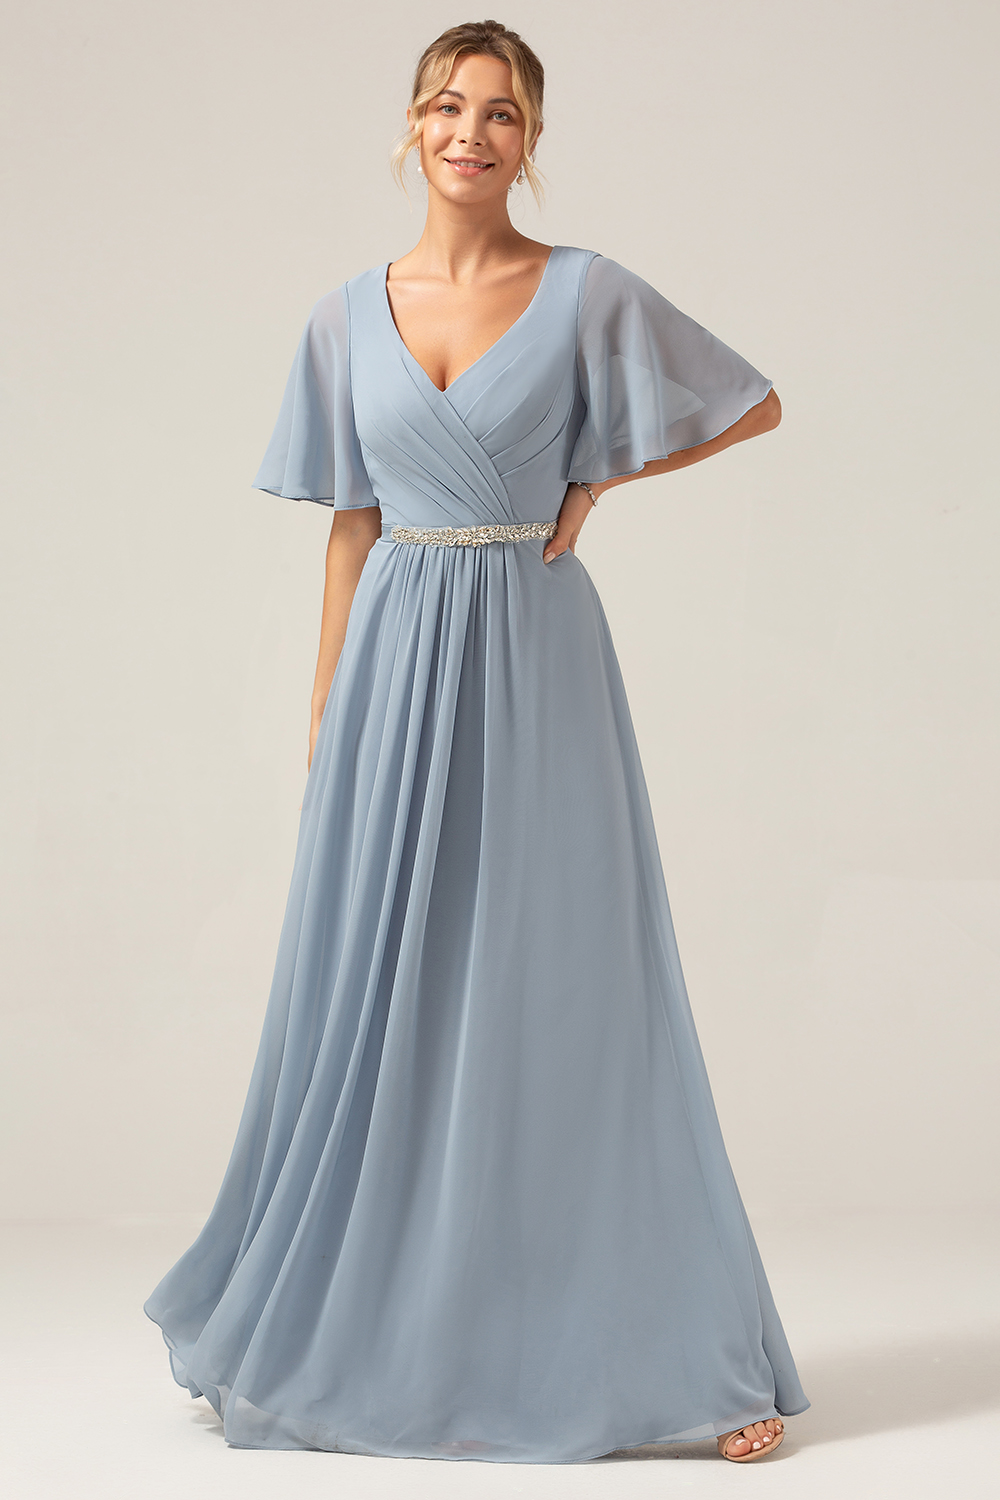 Leely Women Dusty Blue A Line Mother of Bride Dress Chiffon V Neck Bridesmaid Dress with Short Sleeves